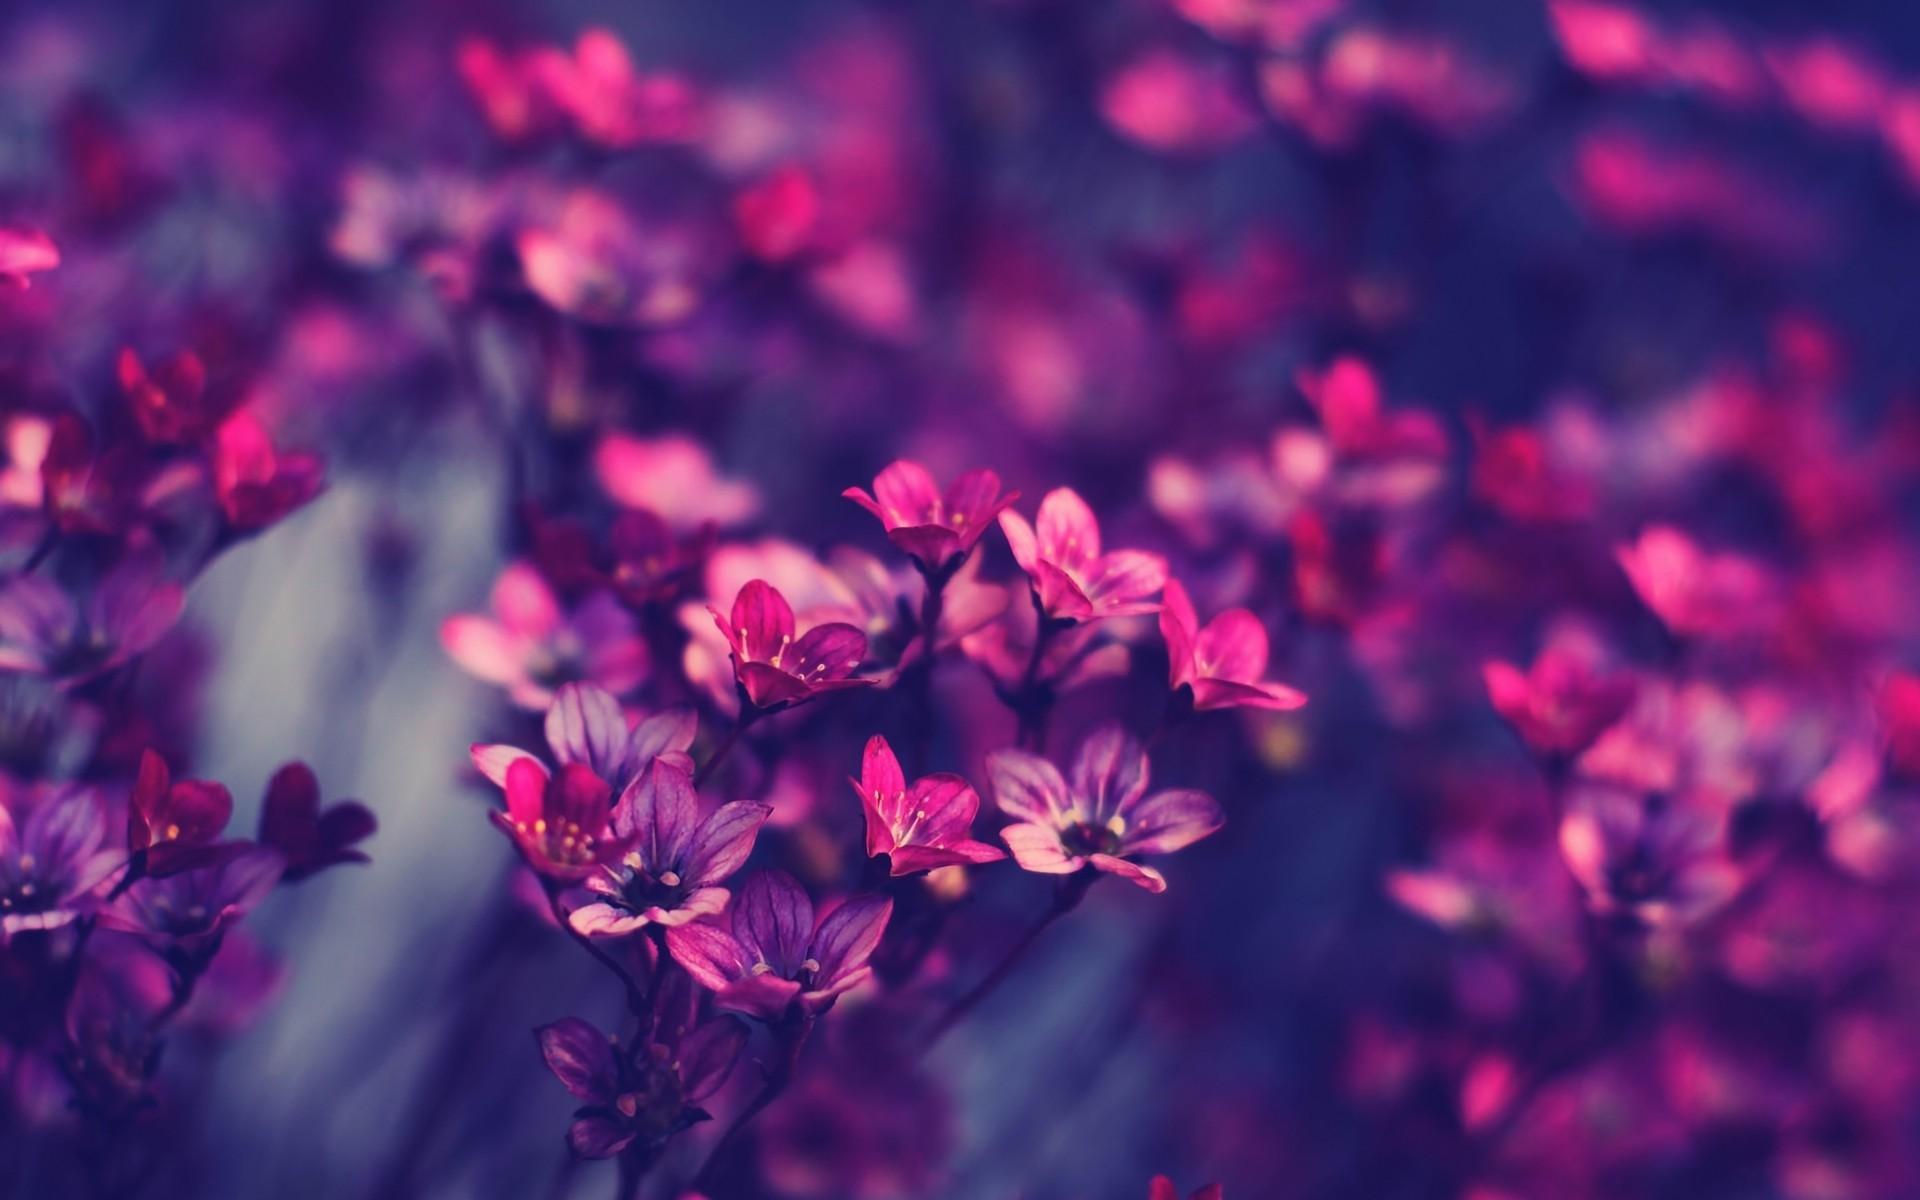 Aesthetic background TumblrDownload free awesome HD background